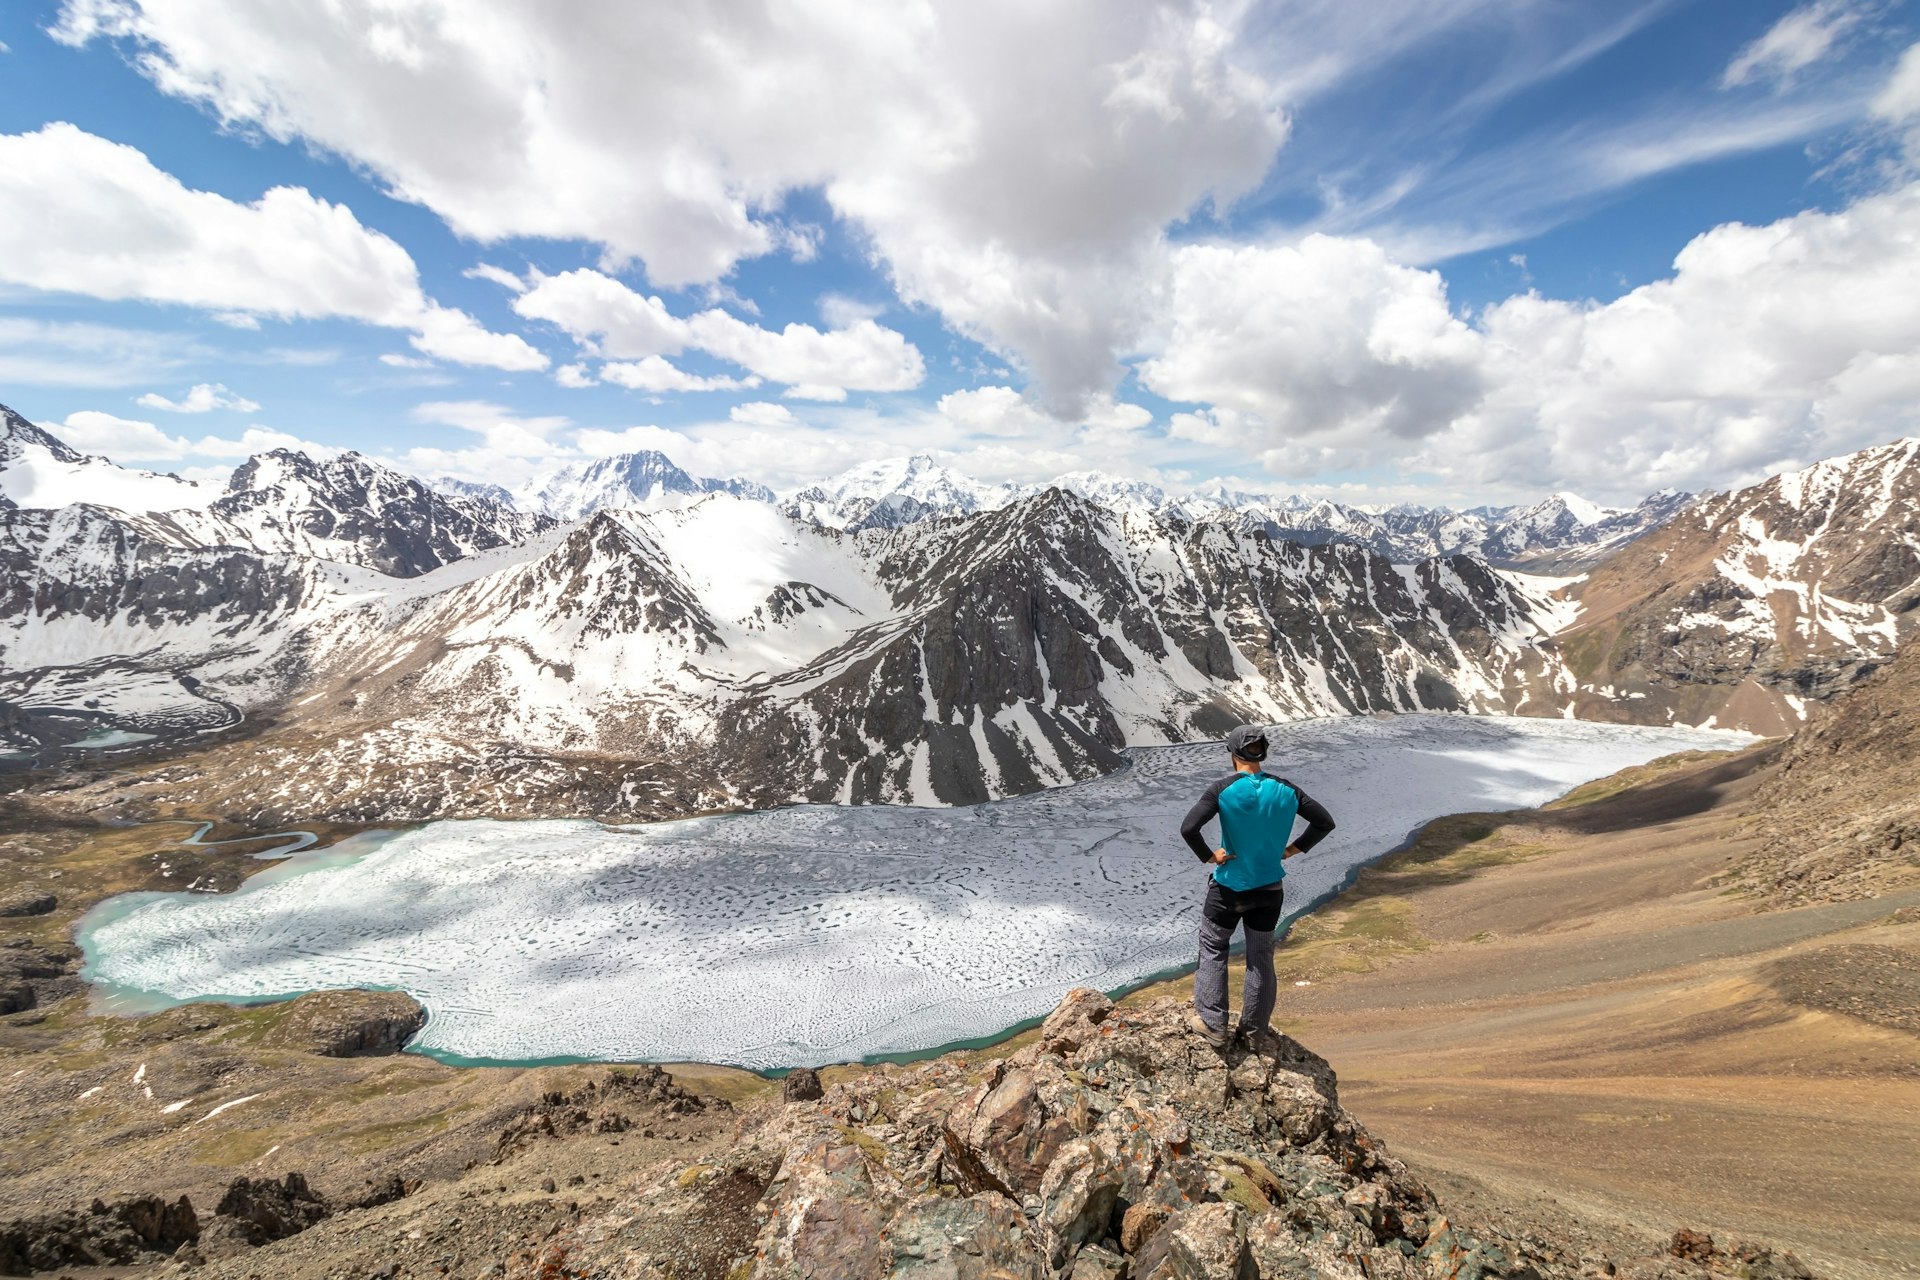 A person stands on the edge of a precipice with a frozen lake below them and a mountain range stretching out before them